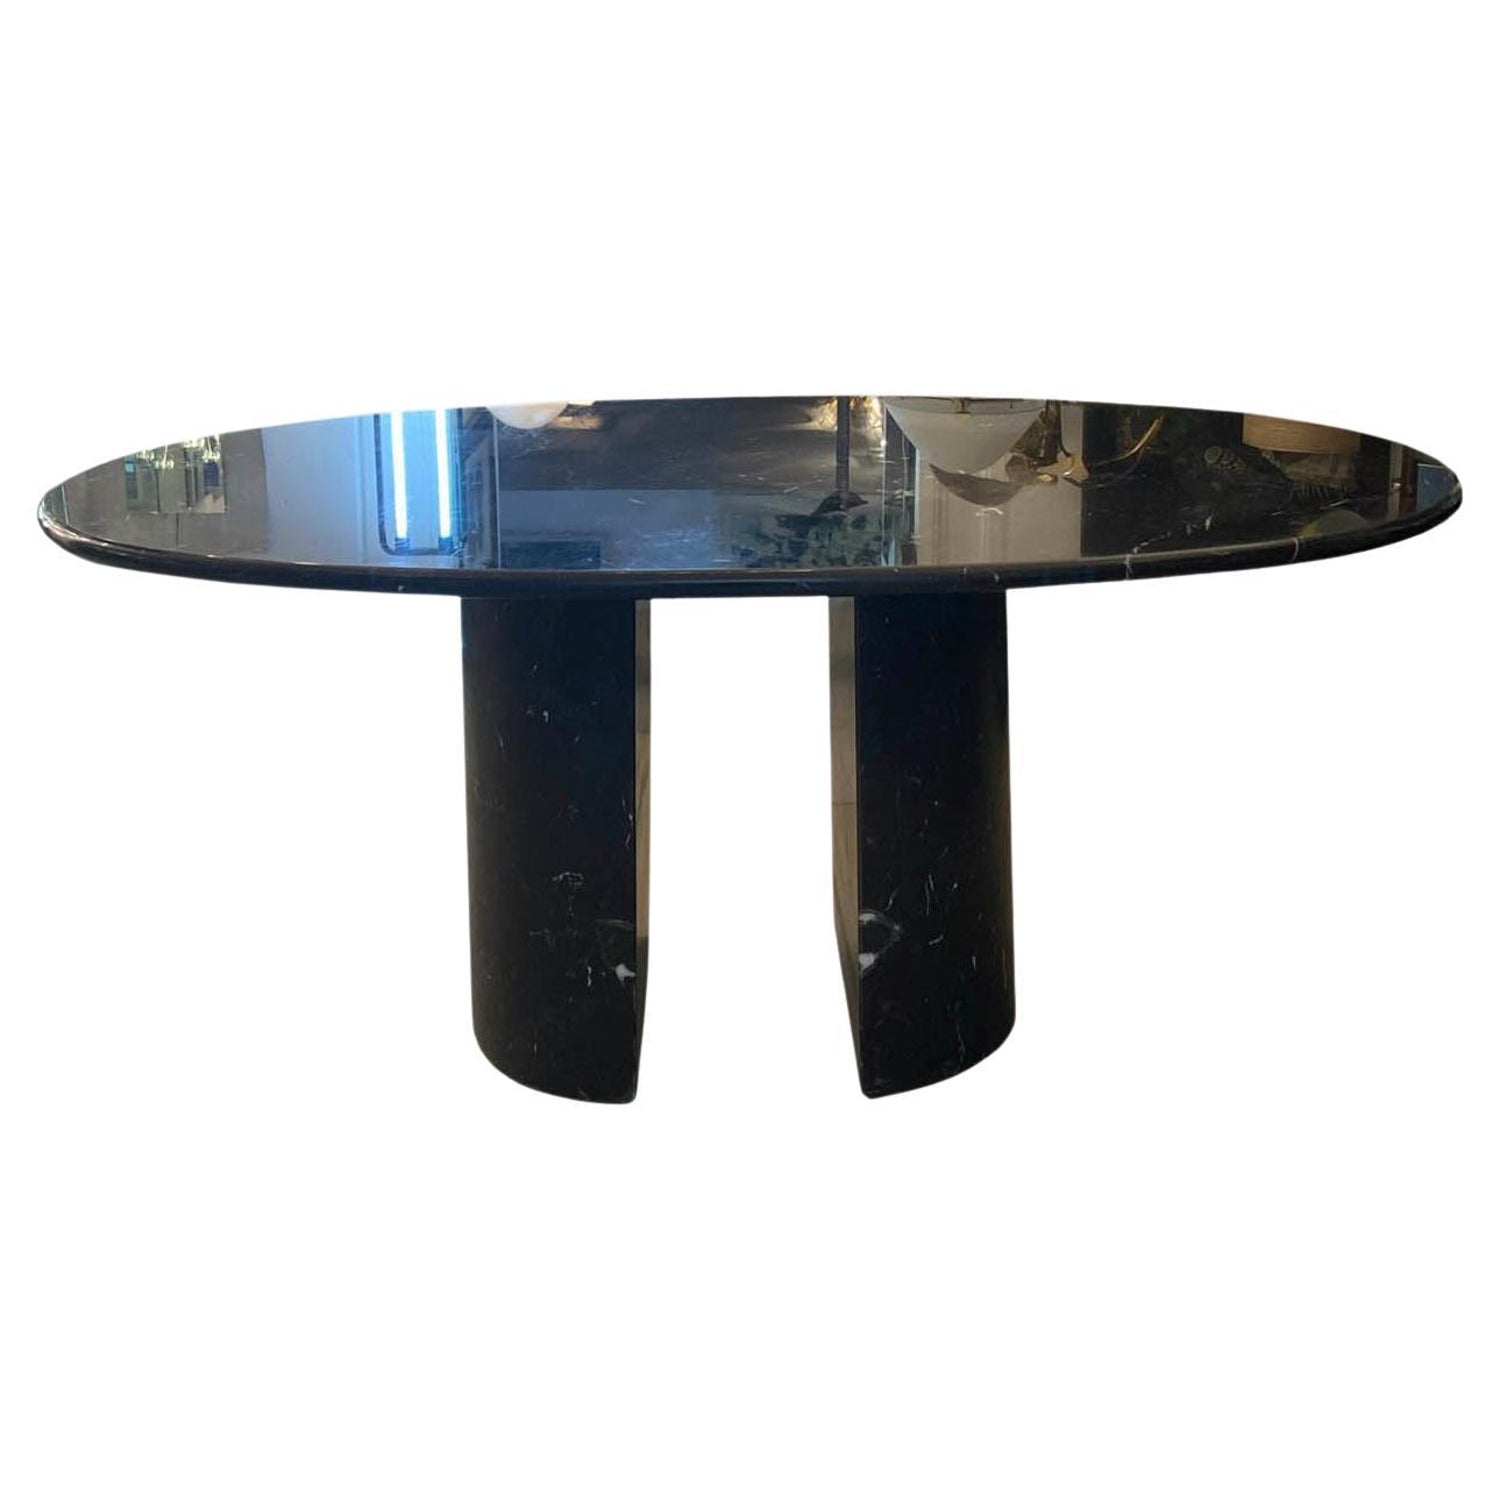 Giulio Cappellini "Dolmen" Marble Table, Italy 2000 For Sale at 1stDibs